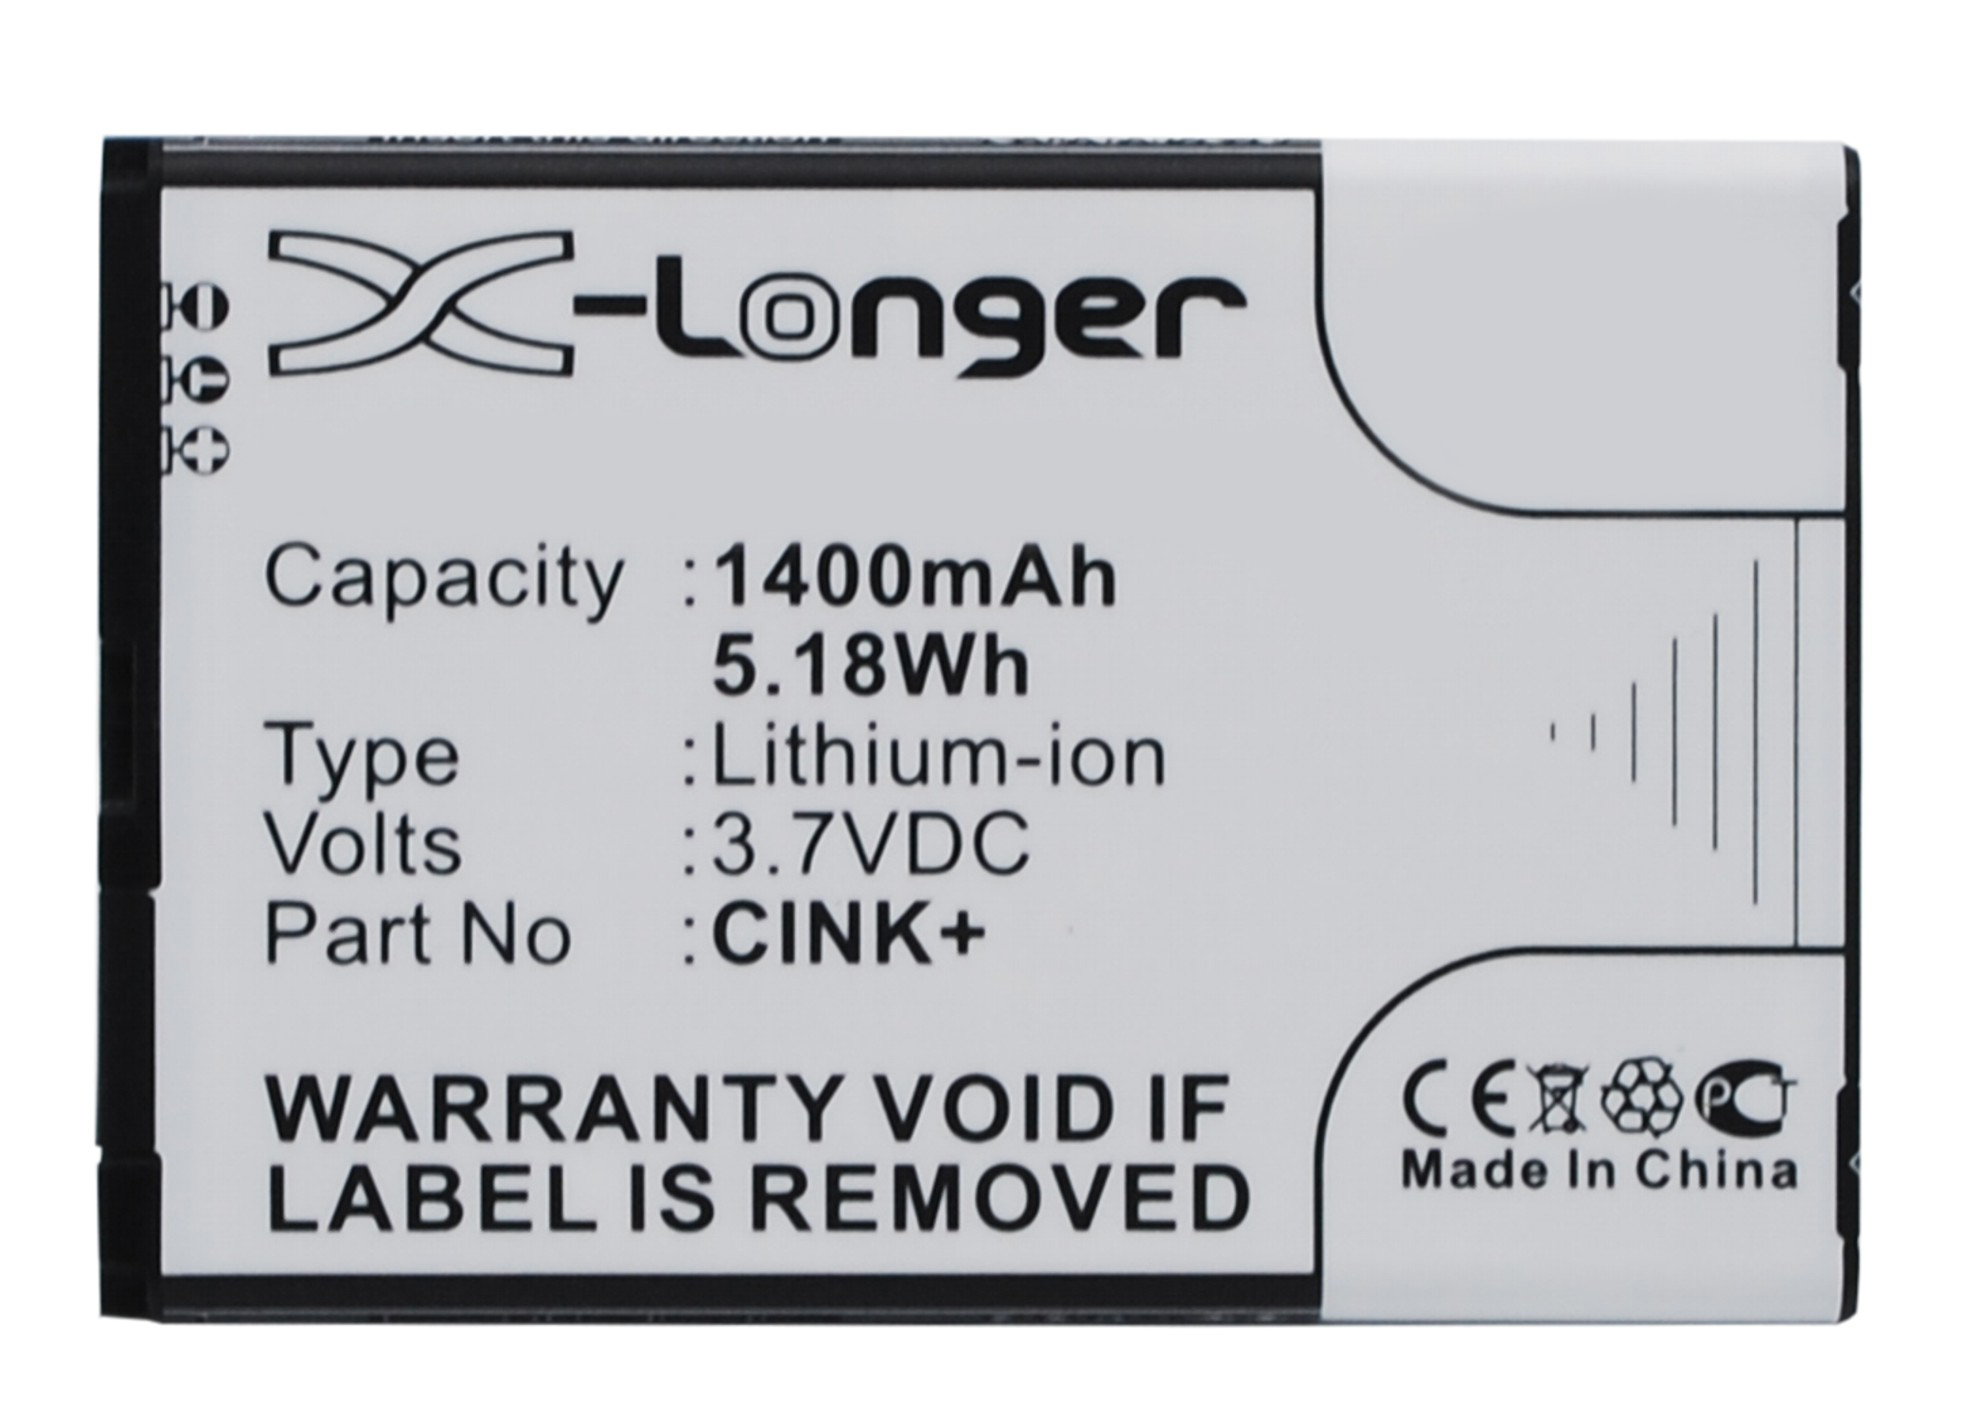 Synergy Digital Battery Compatible With Wiko CINK+ Cellphone Battery - (Li-Ion, 3.7V, 1400 mAh / 5.18Wh)